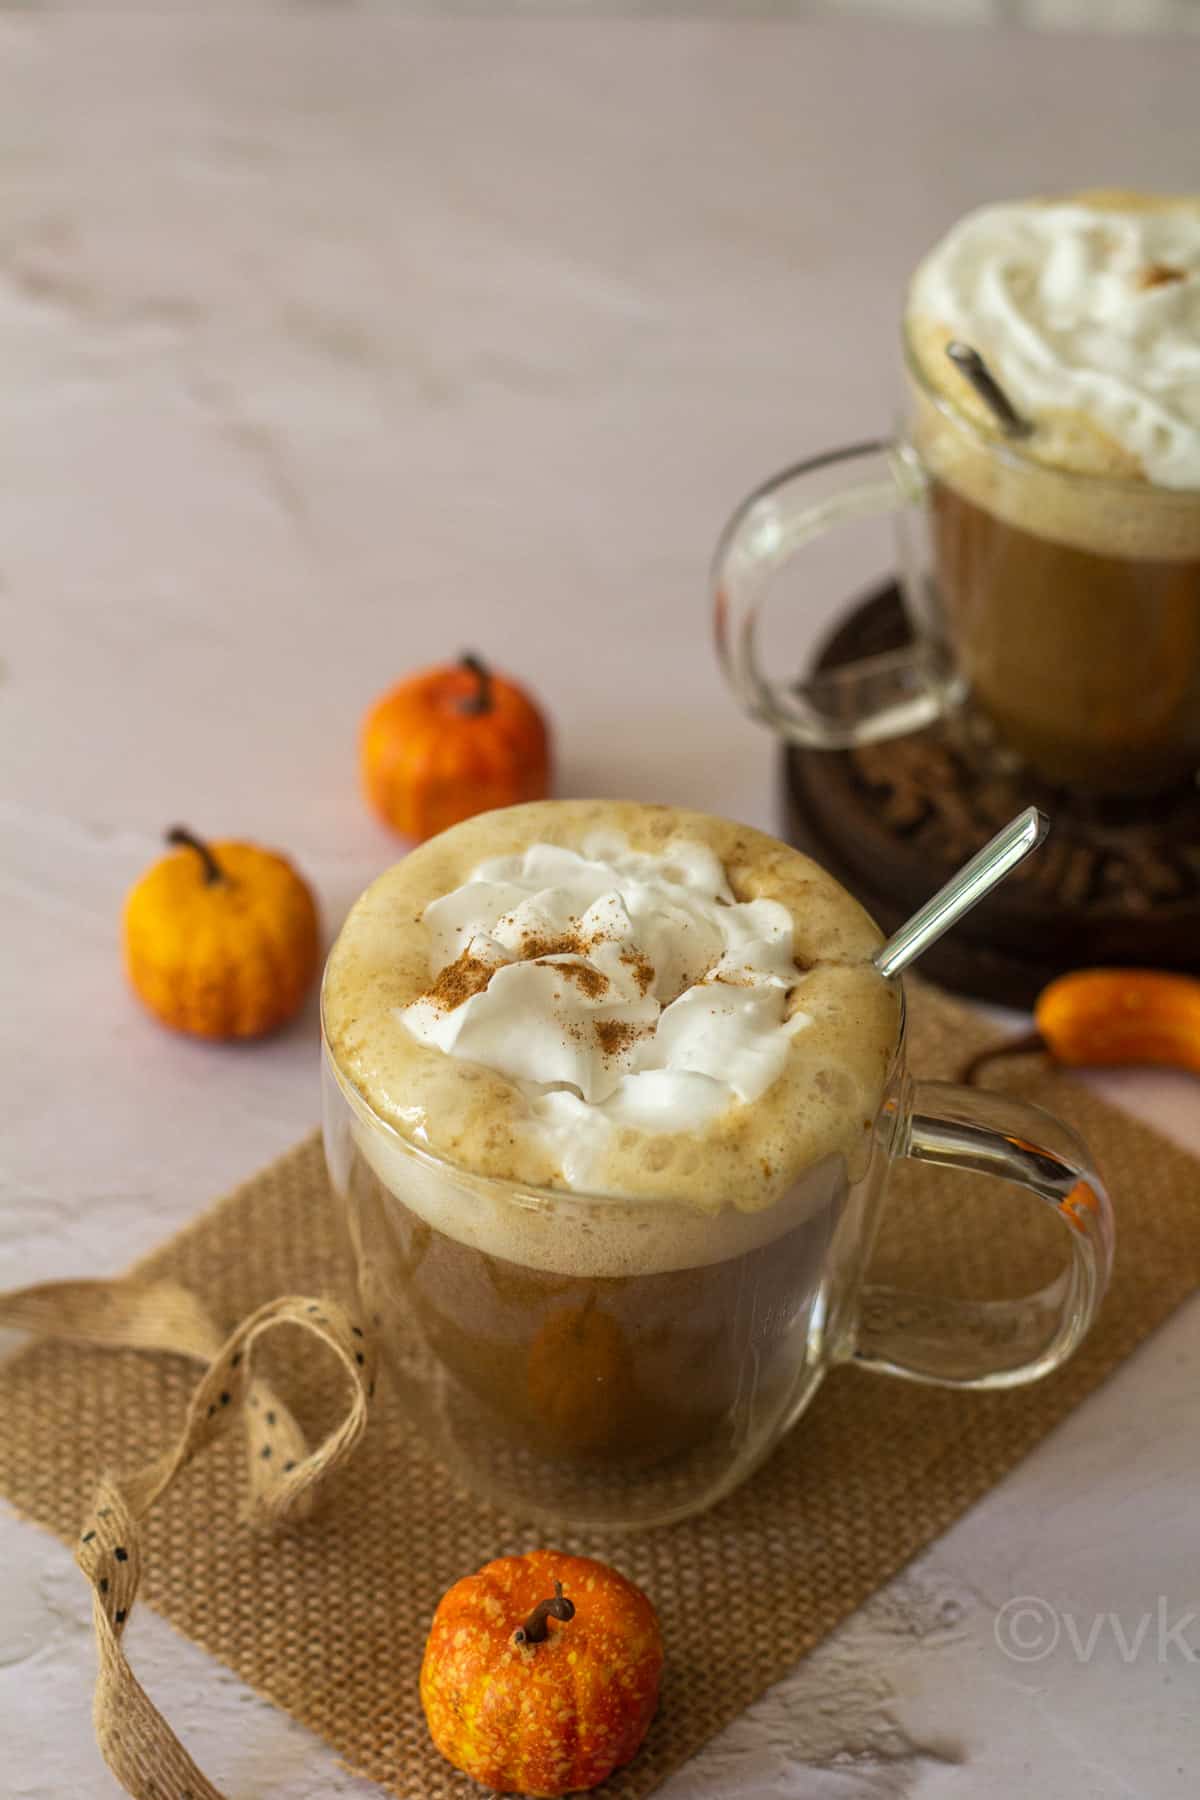 vegan pumpkin spice latte served in a glass placed on a burlap cloth